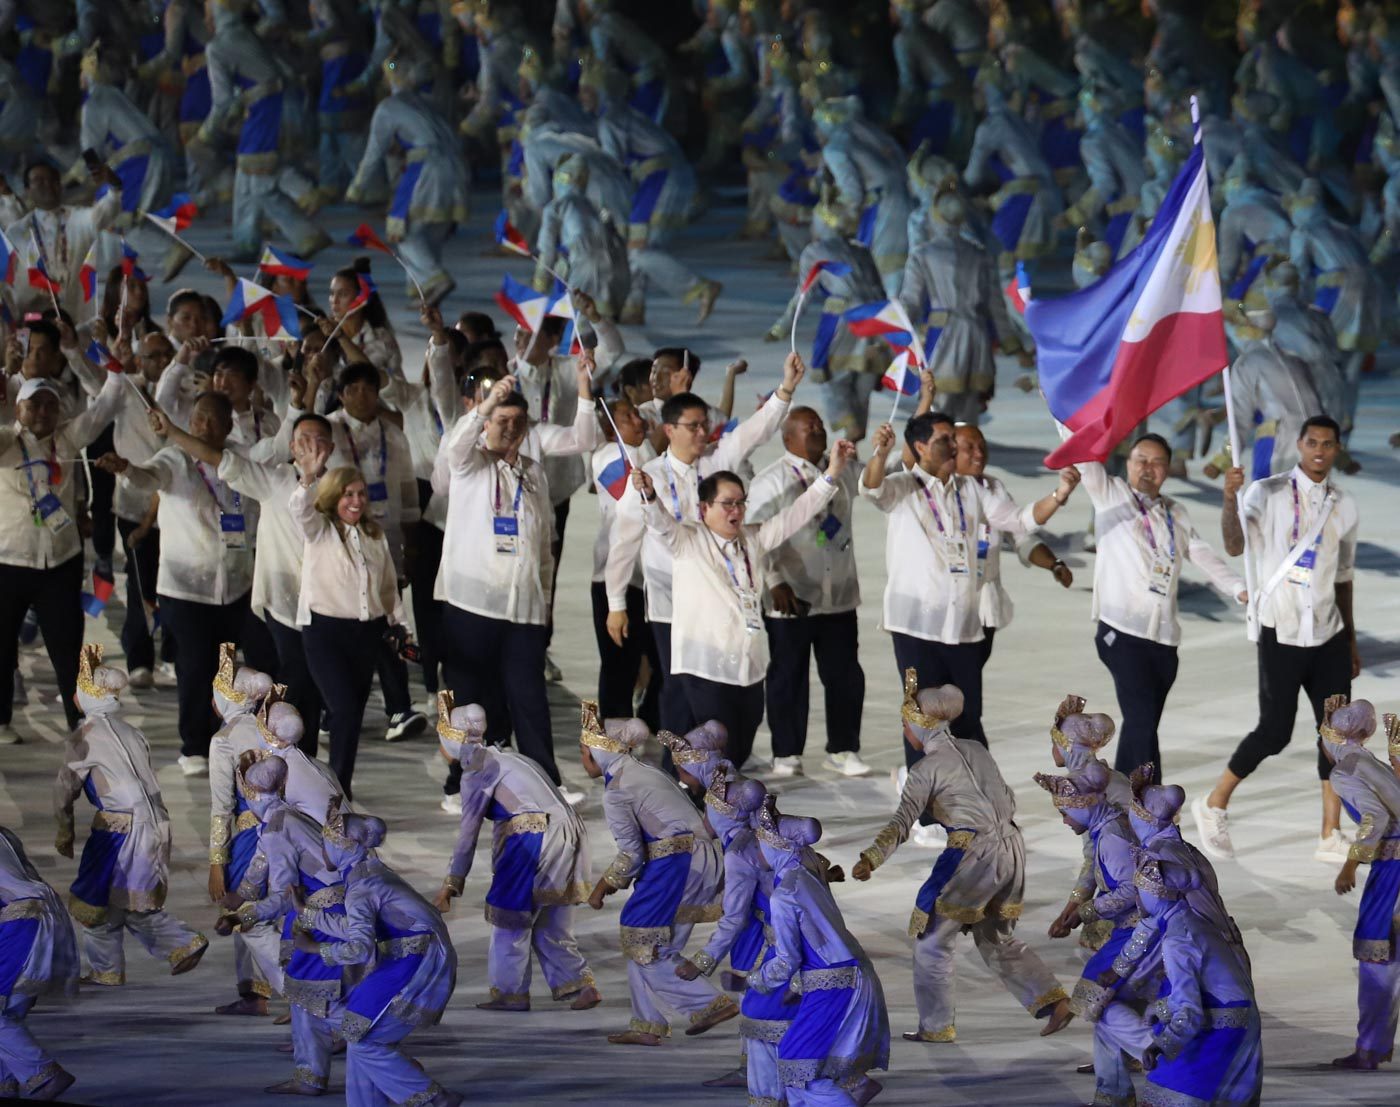 PH flag-bearer Clarkson: One of the happiest moments in my life